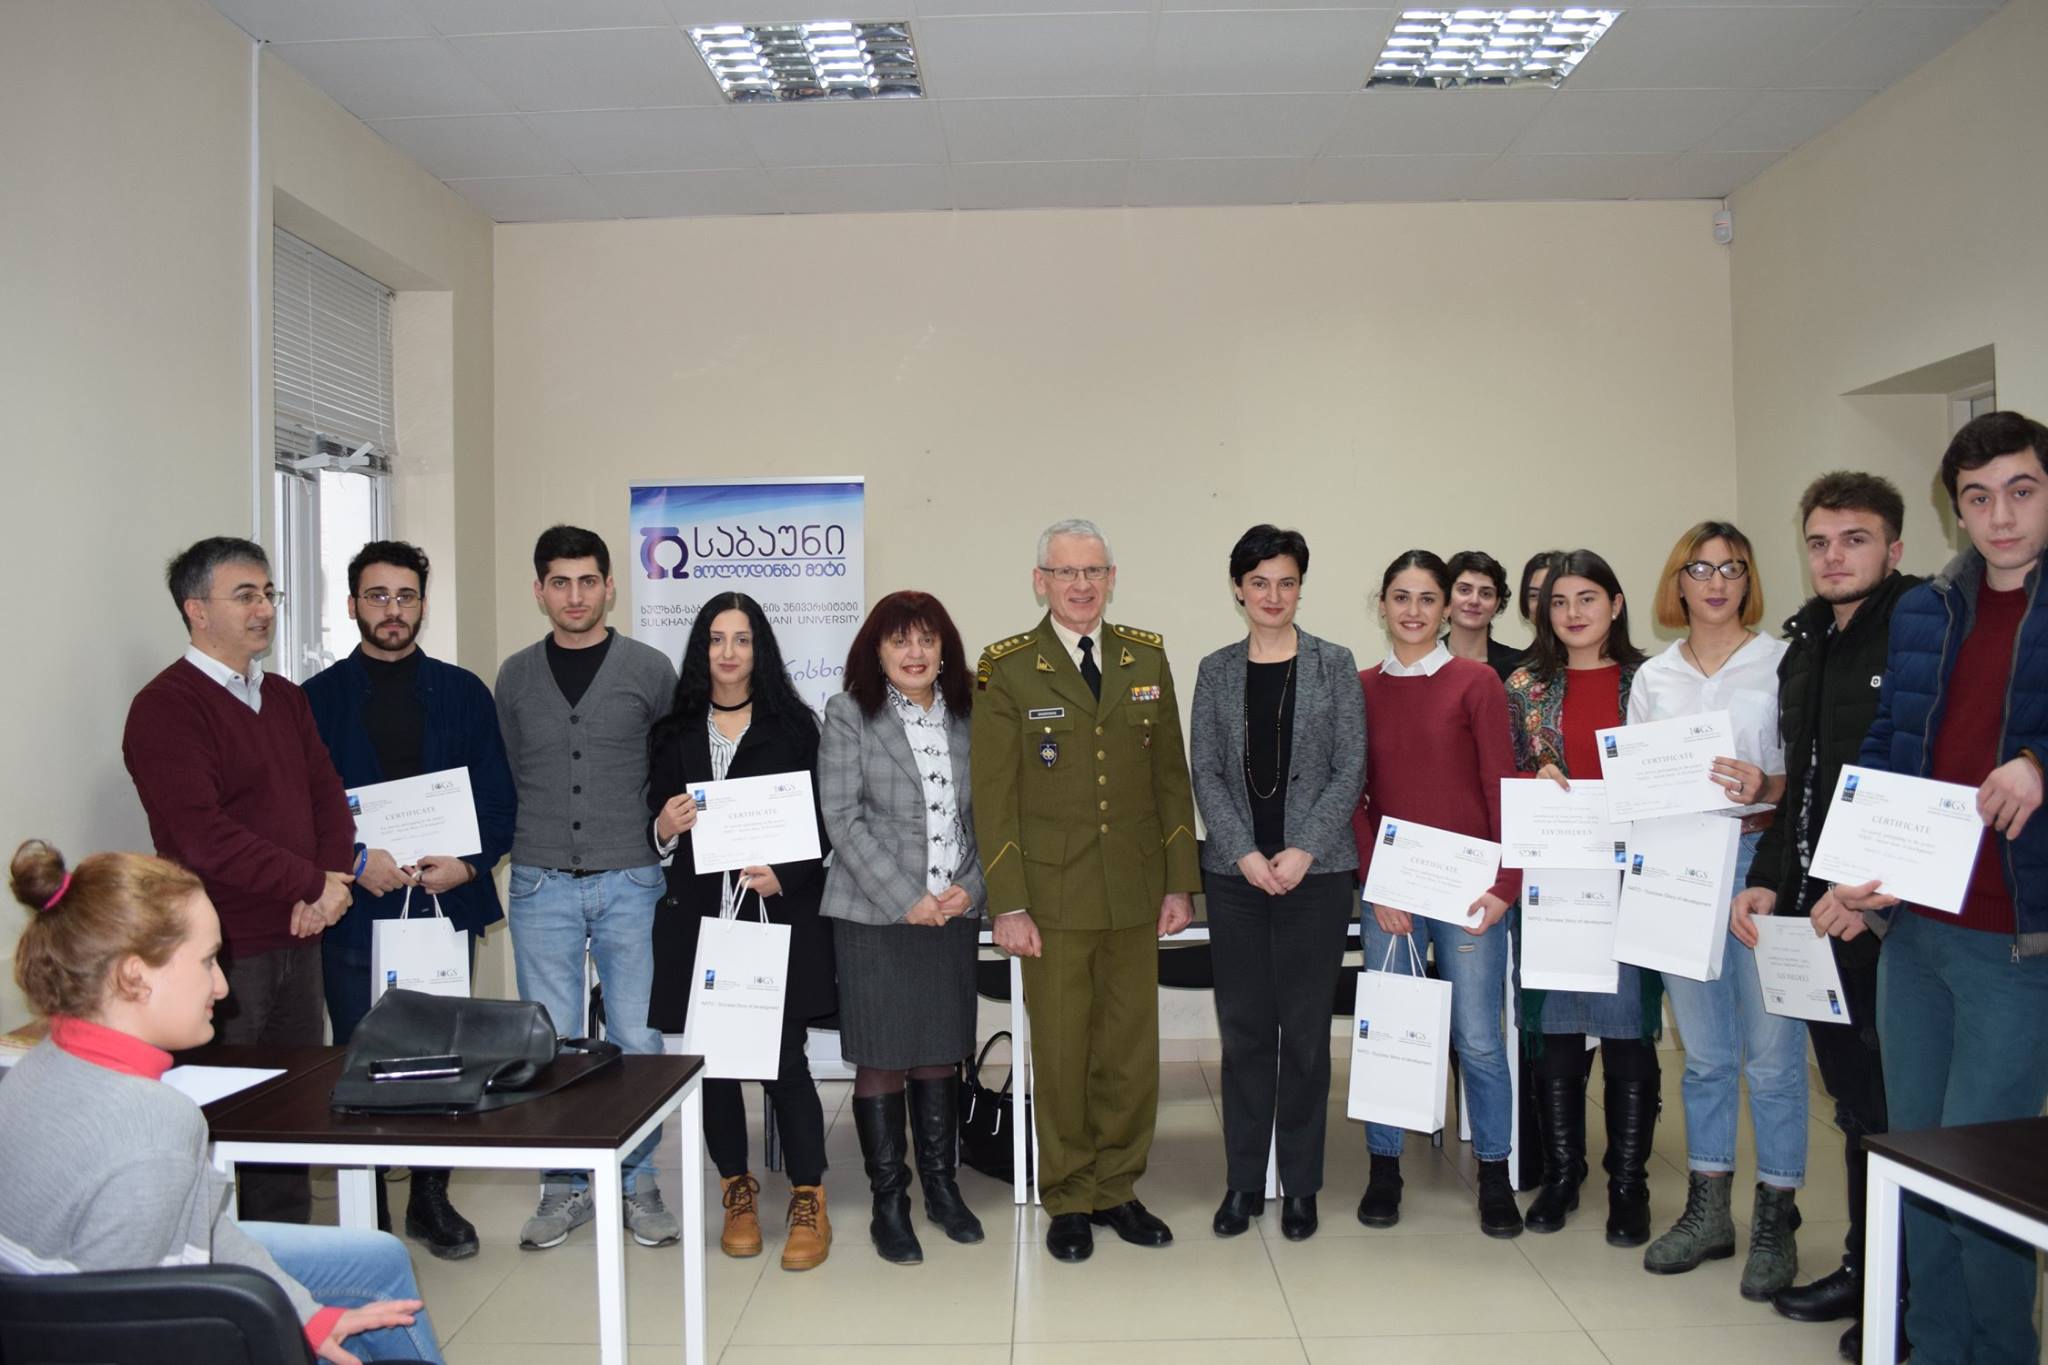 Sabaun students were awarded by a NATO Liaison Officer